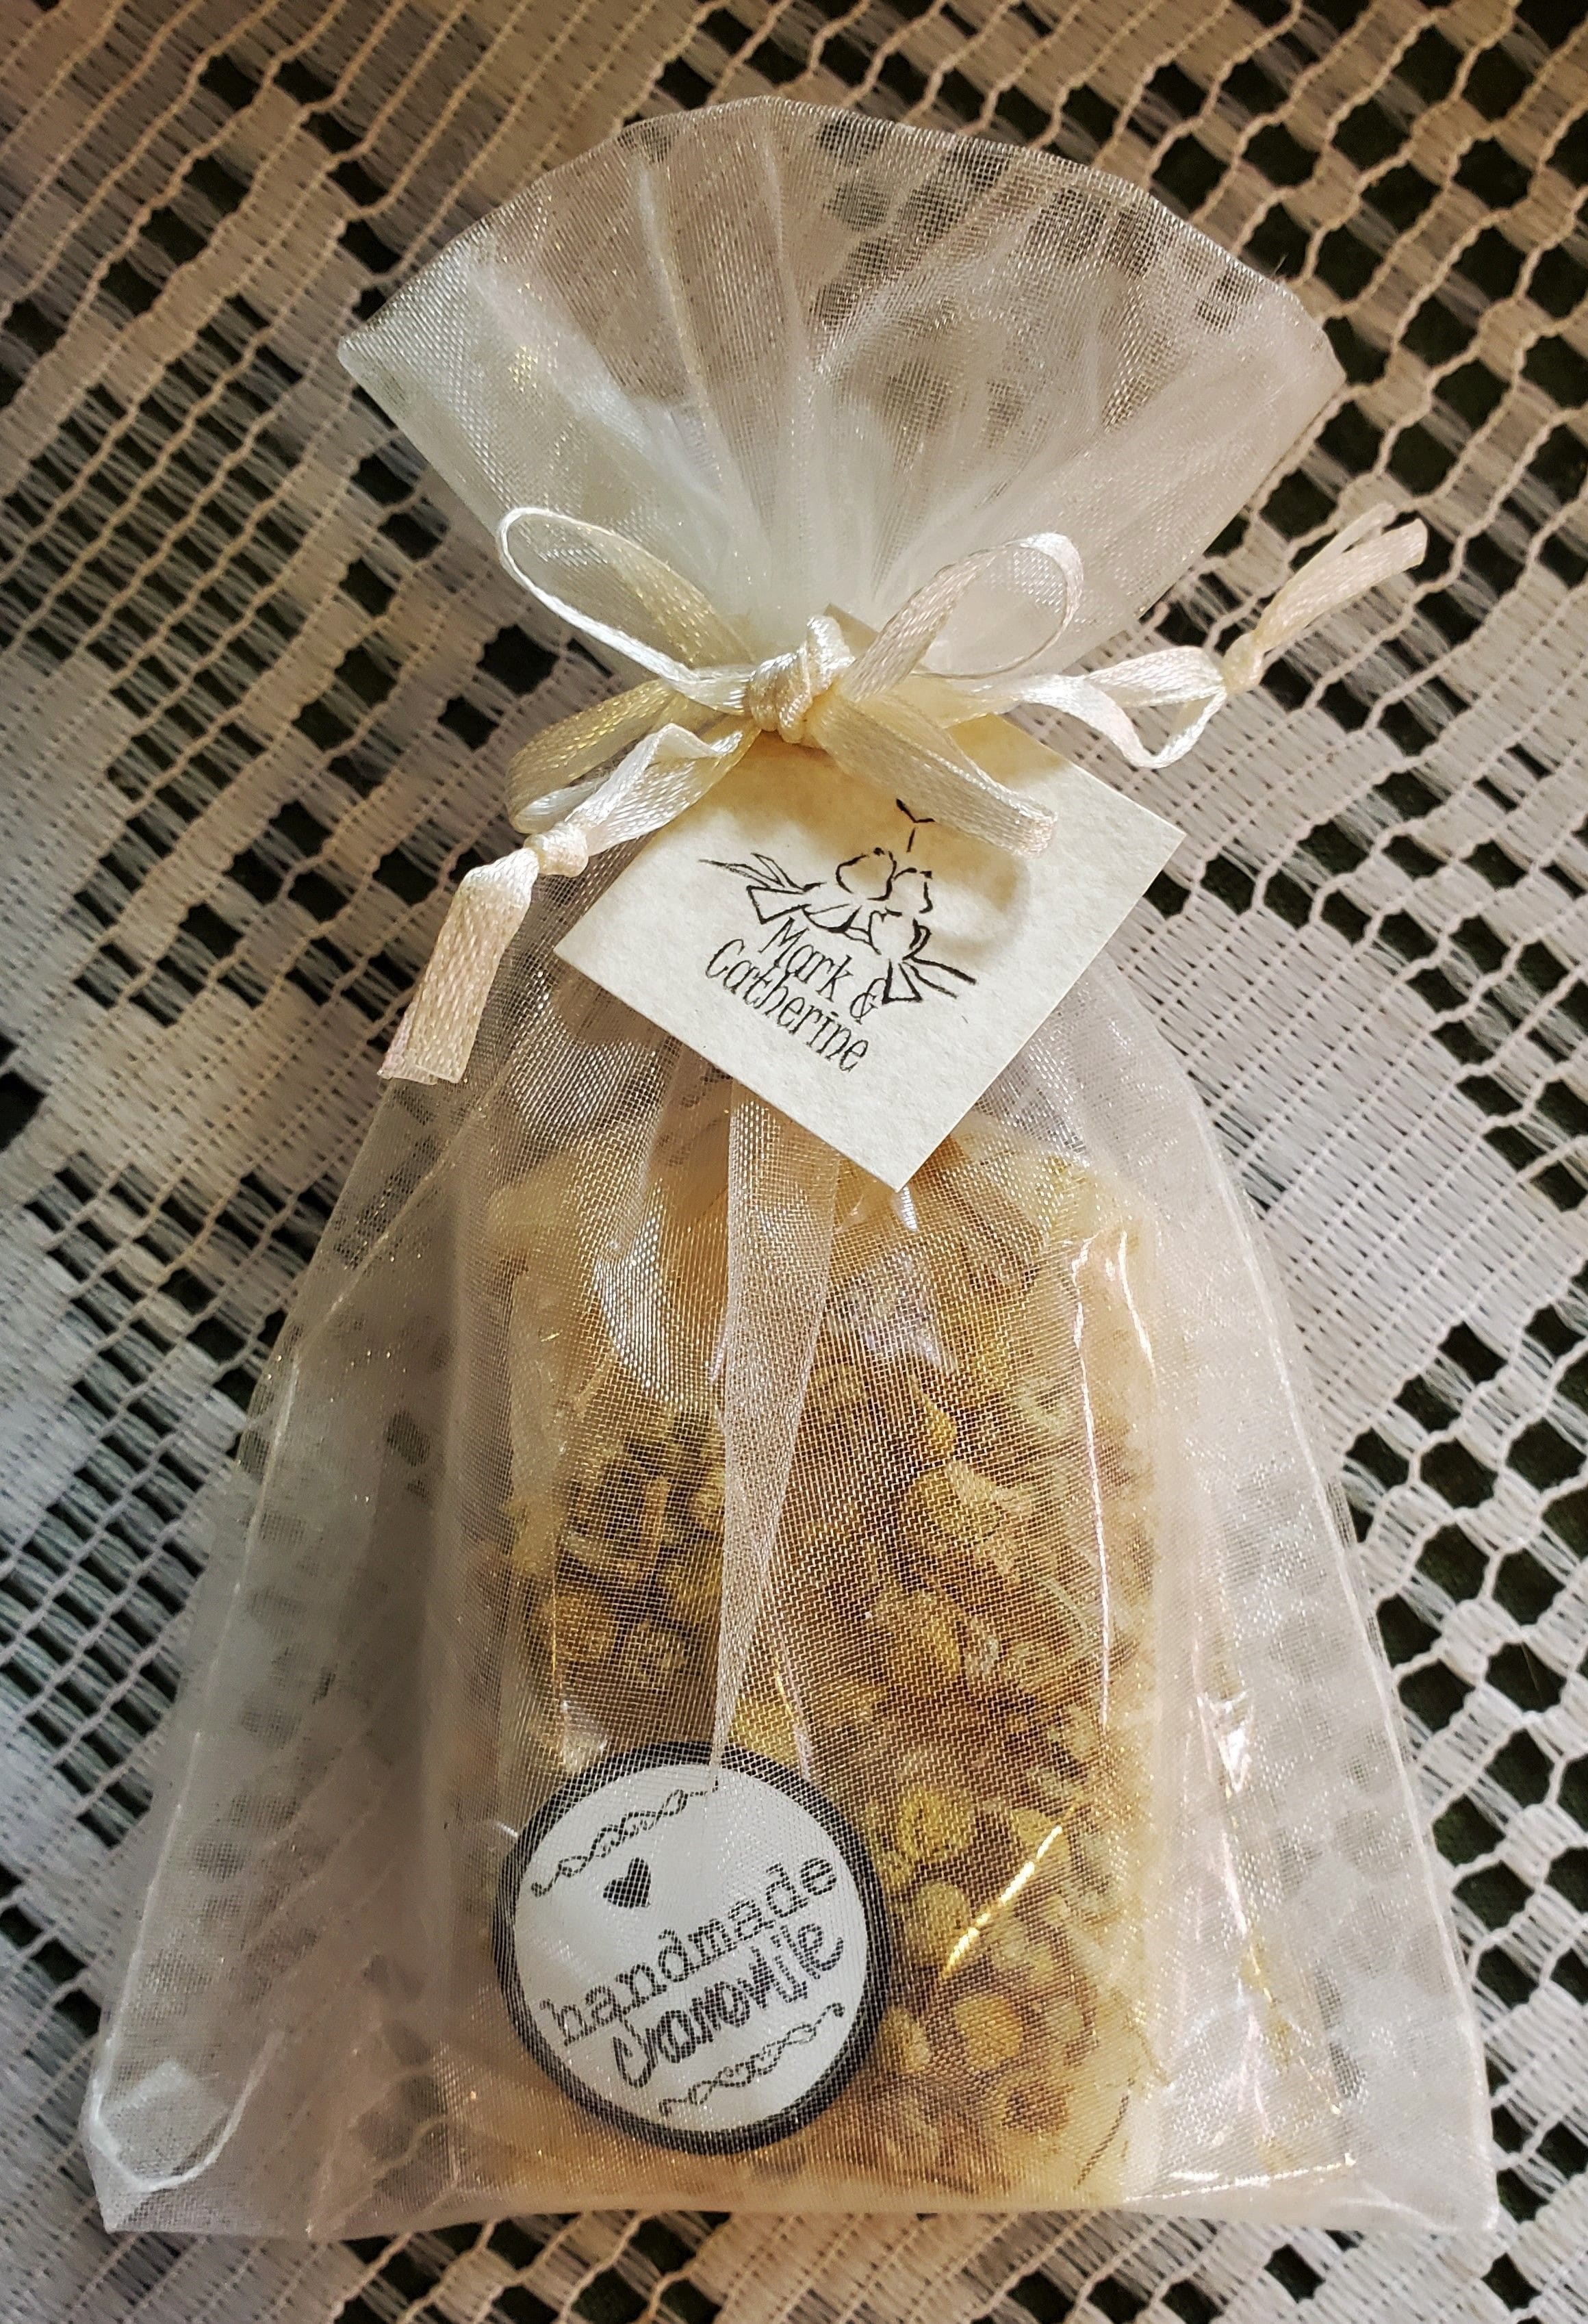 If you are looking for that handmade touch in a quality natural soap gift favour we have several cute selections for you to choose from.  Love local.